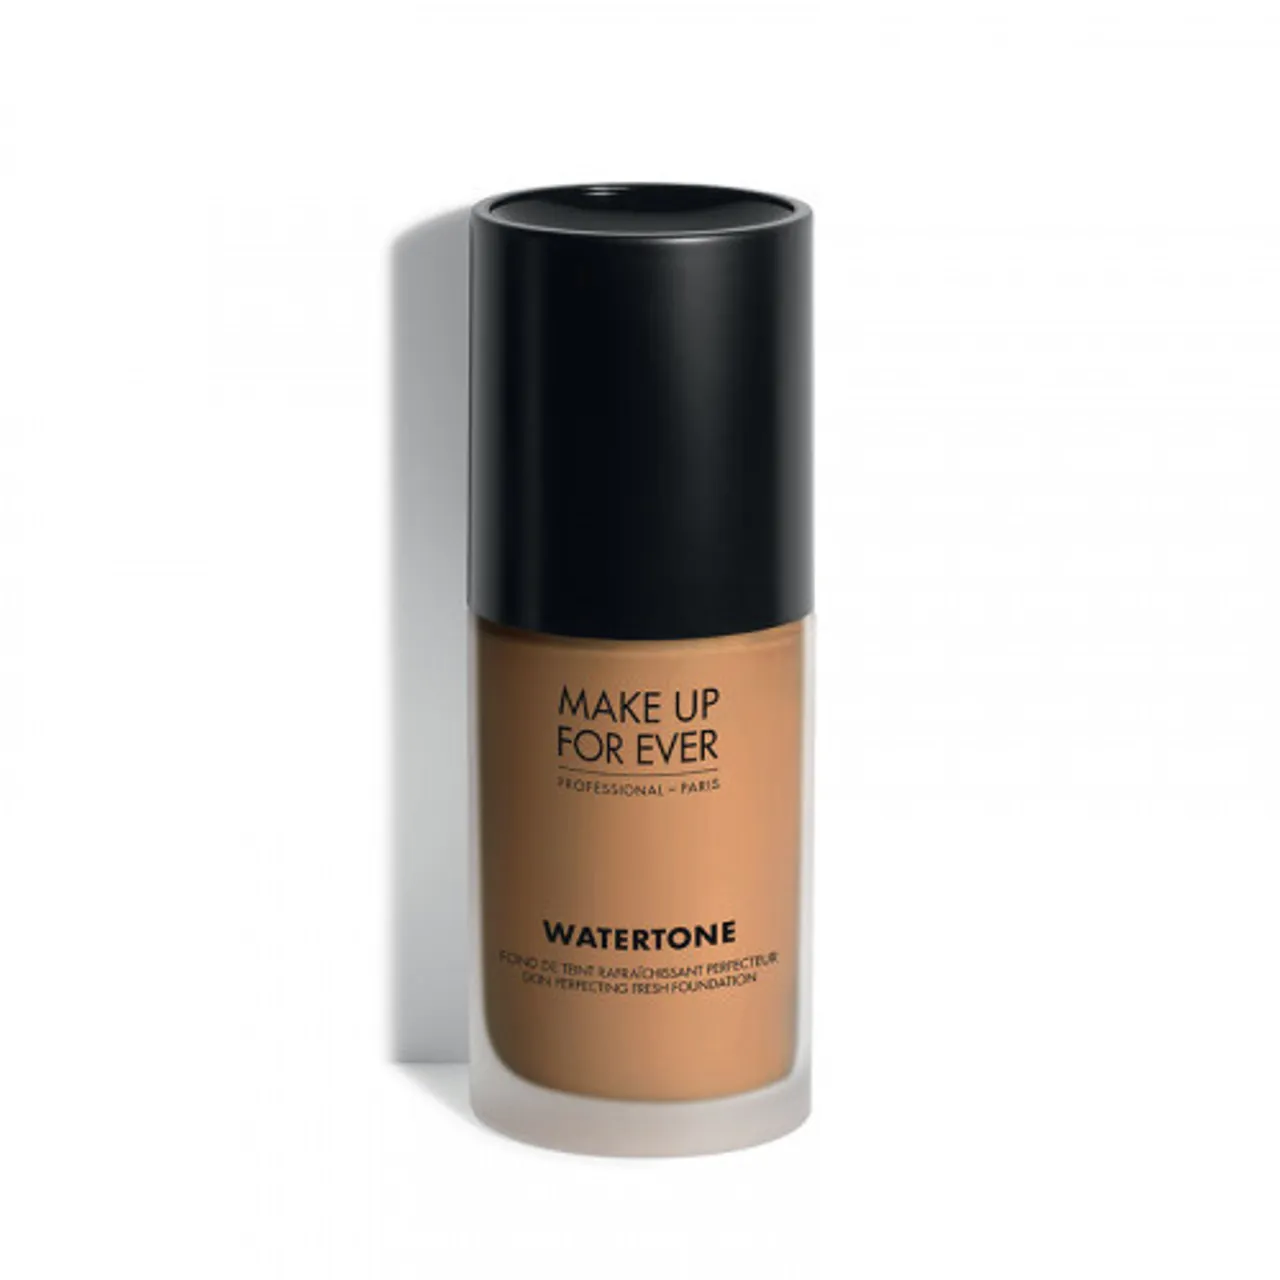 Make Up For Ever Watertone Skin-Perfecting Fresh Foundation Y412